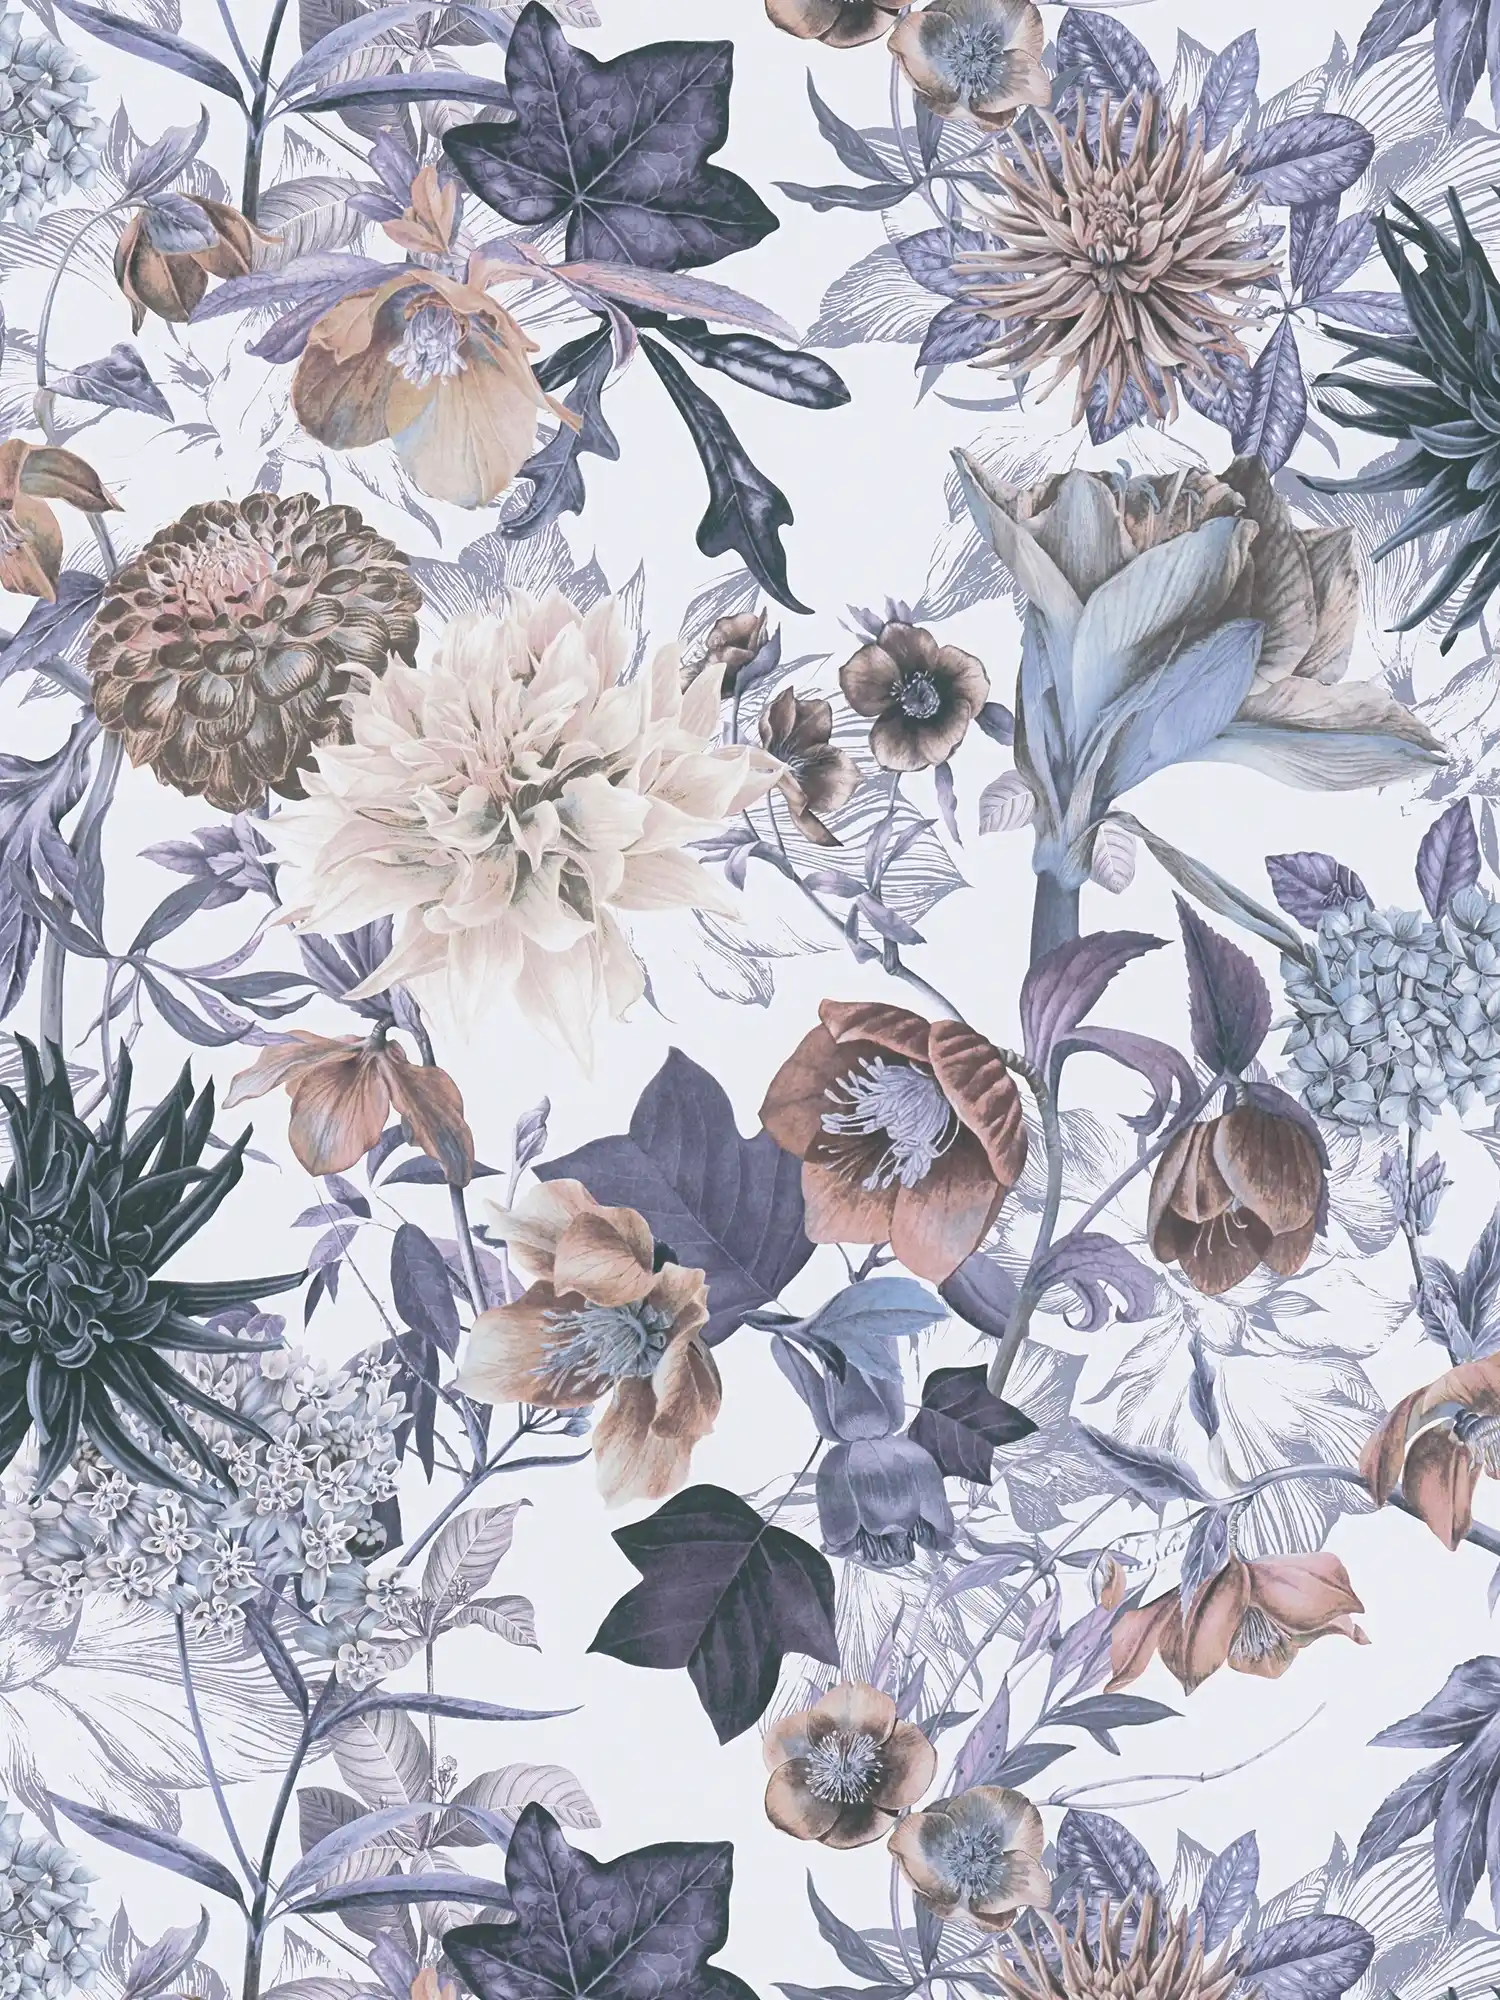 Floral wallpaper with floral pattern - blue, brown, grey
